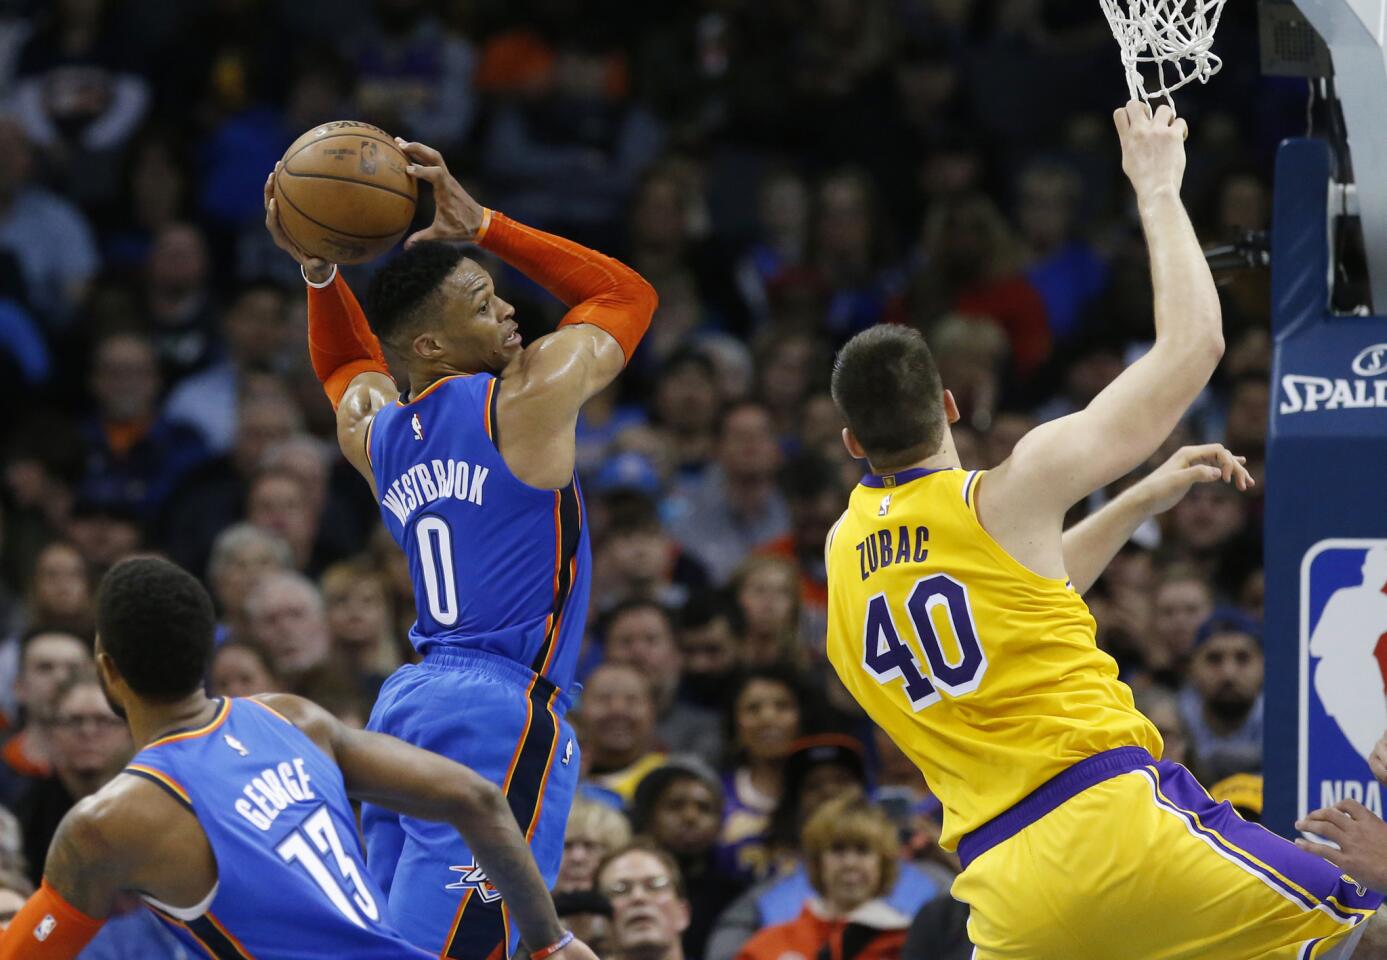 Oklahoma City Thunder guard Russell Westbrook (0) grabs a rebound between teammate Paul George (13) and Los Angeles Lakers center Ivica Zubac (40) during an NBA basketball game between the Los Angeles Lakers and the Oklahoma City Thunder in Oklahoma City, Thursday, Jan. 17, 2019. (AP Photo/Sue Ogrocki)